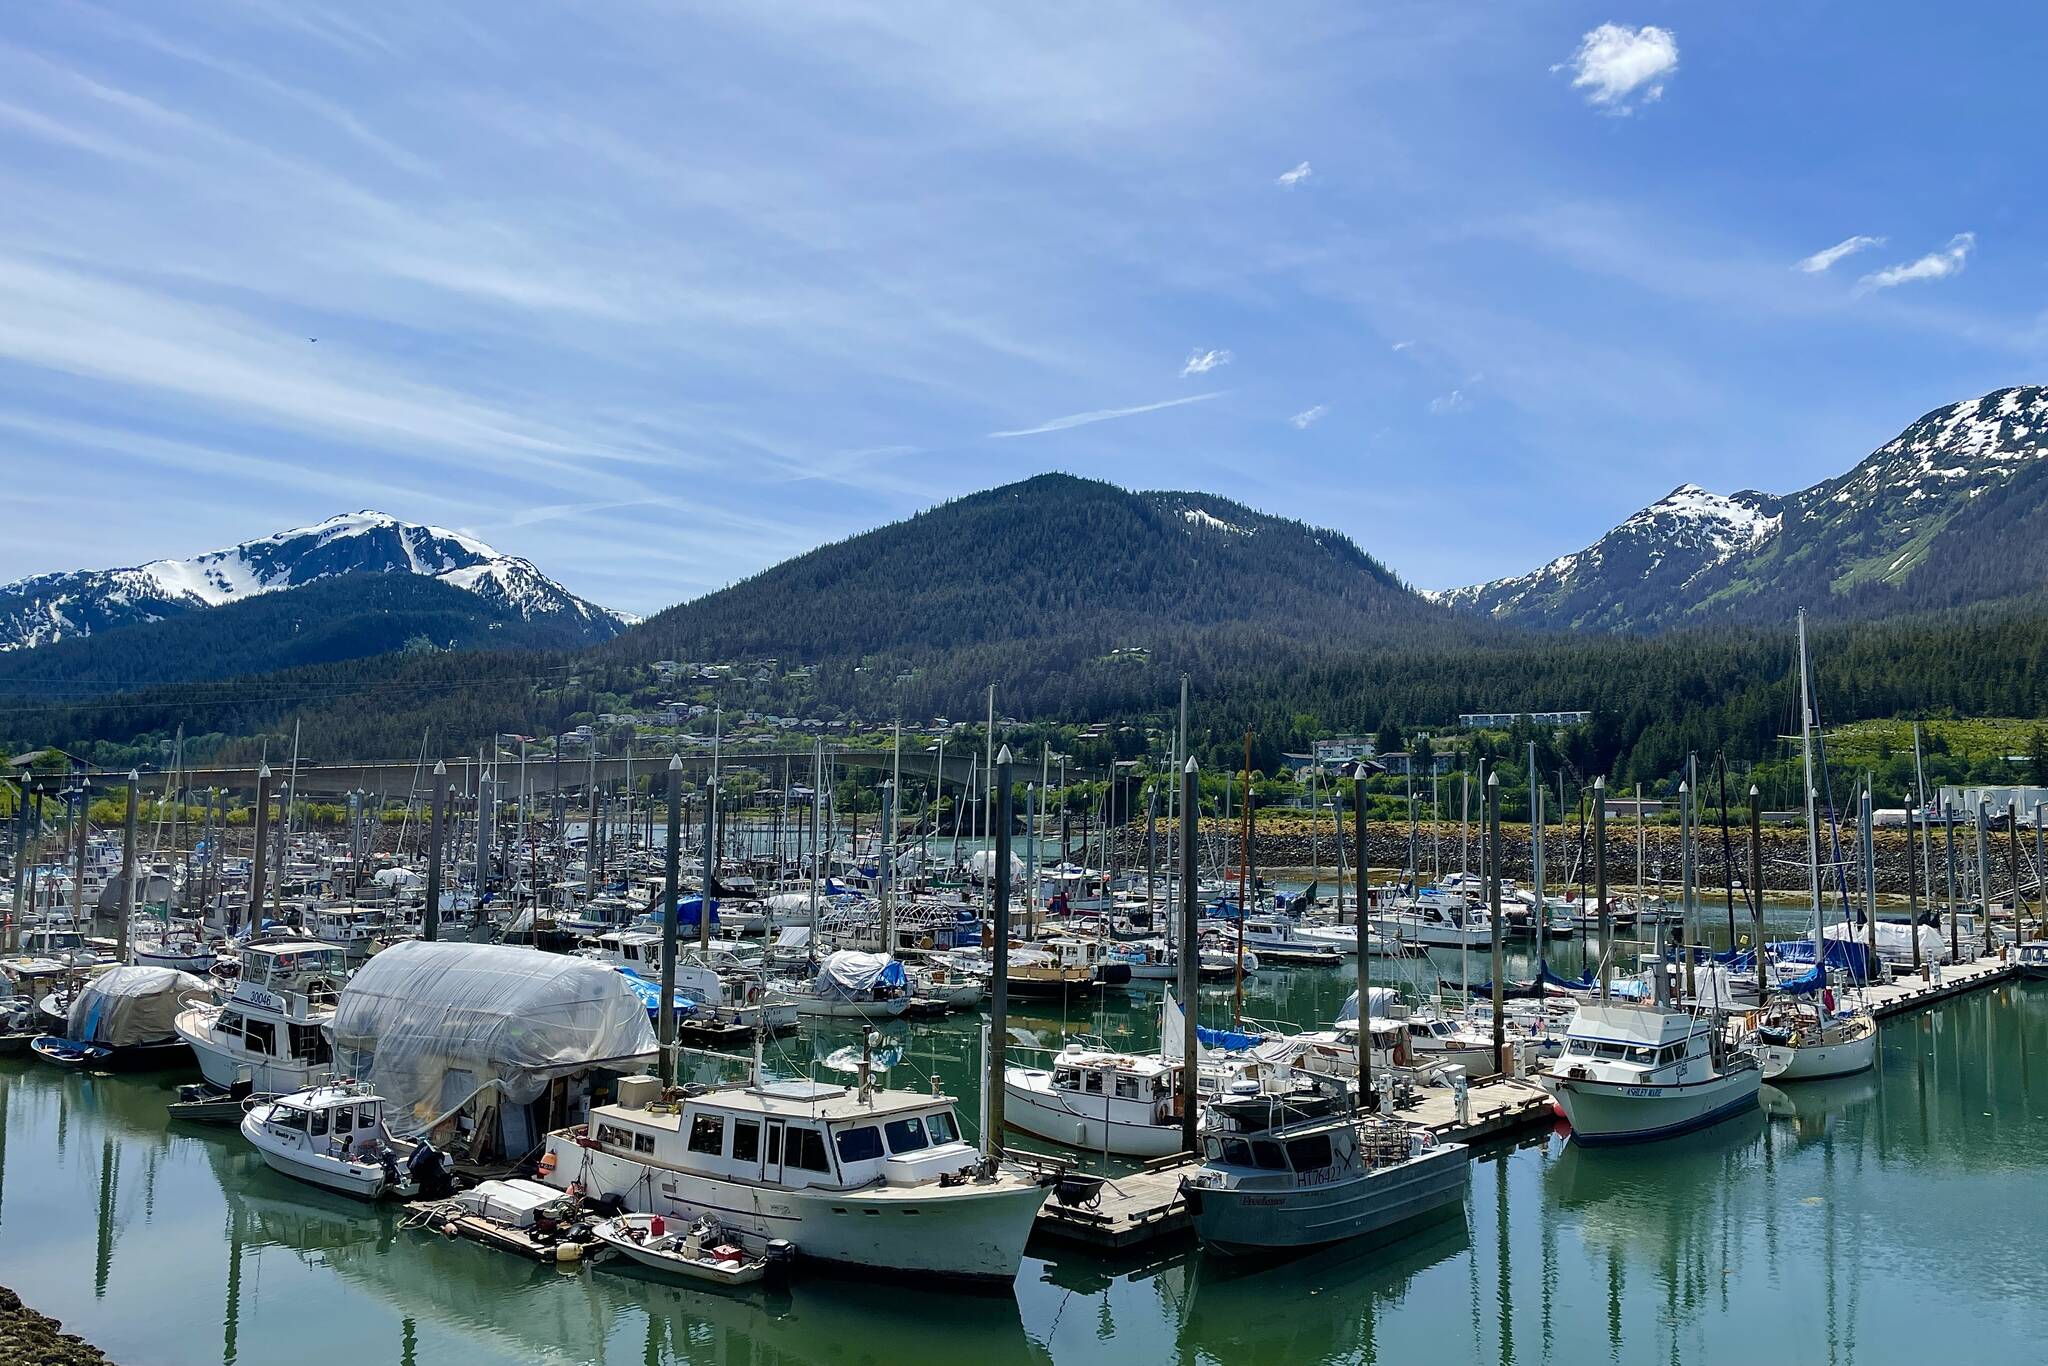 A Juneau man was arrested for possession of drugs in Harris Harbor on Monday. (Michael S. Lockett / Juneau Empire)